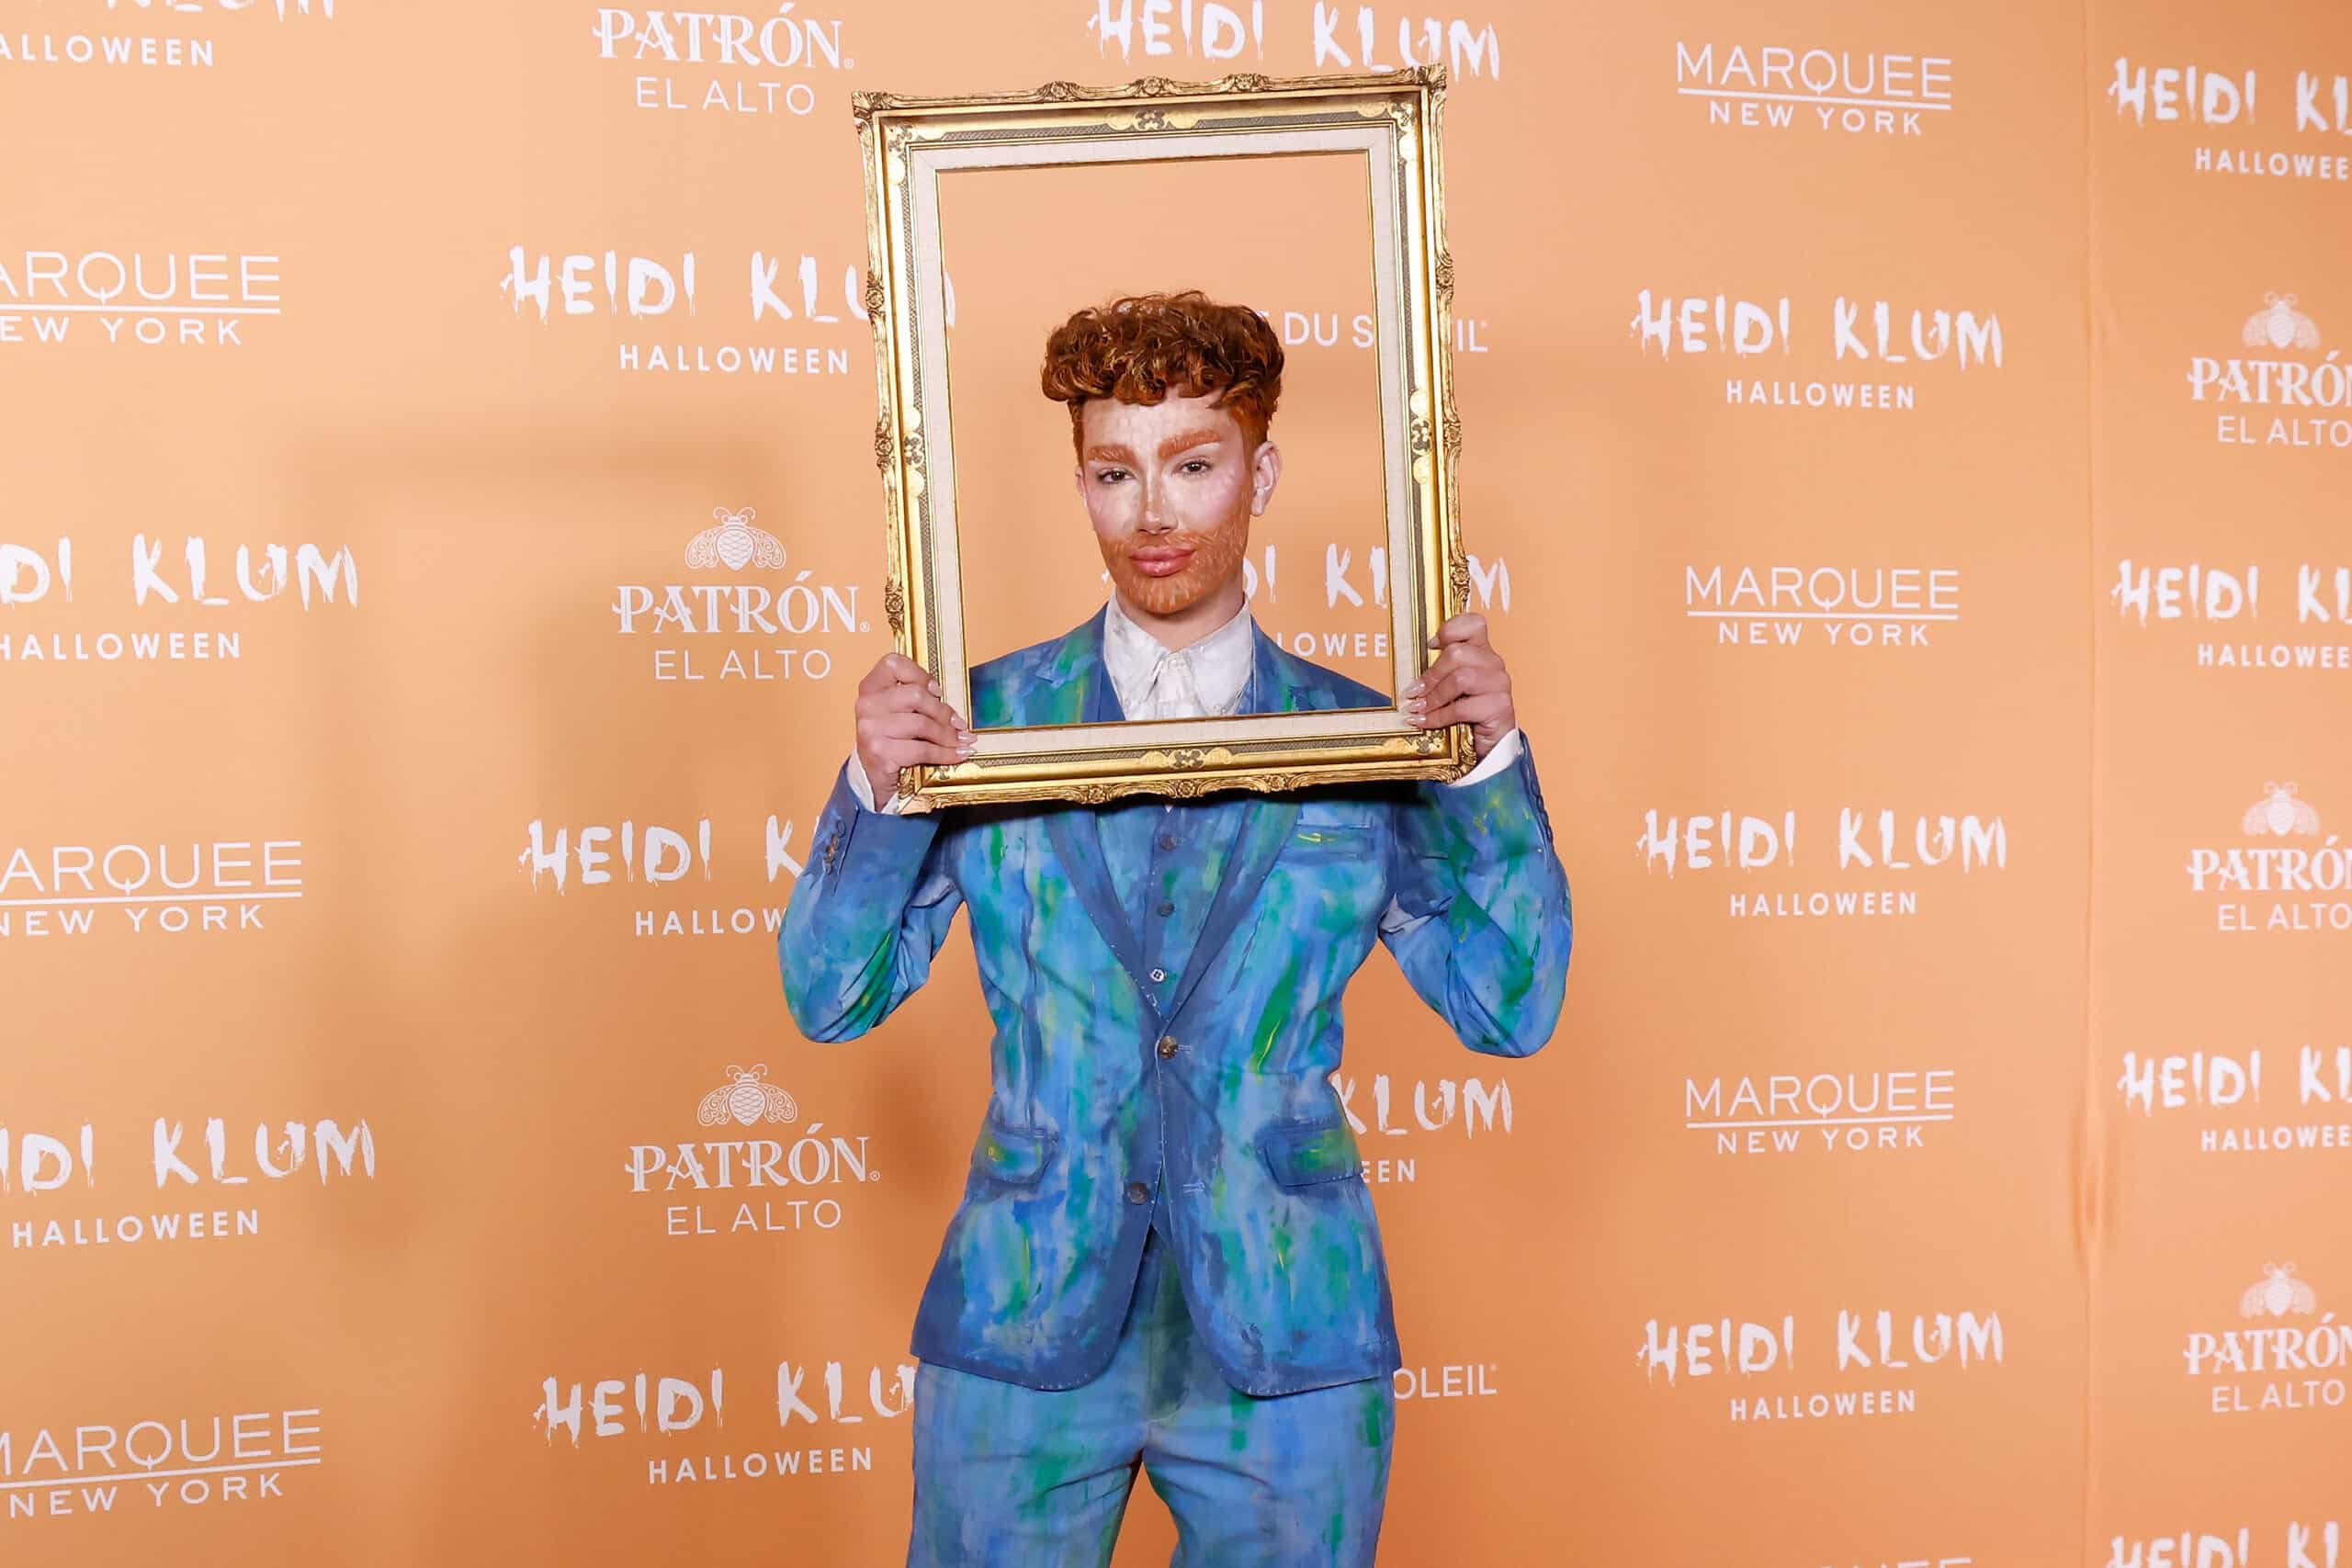 NEW YORK, NEW YORK - OCTOBER 31: James Charles attends the 2023 Heidi Klum Hallowe'en Party at Marquee on October 31, 2023 in New York City.